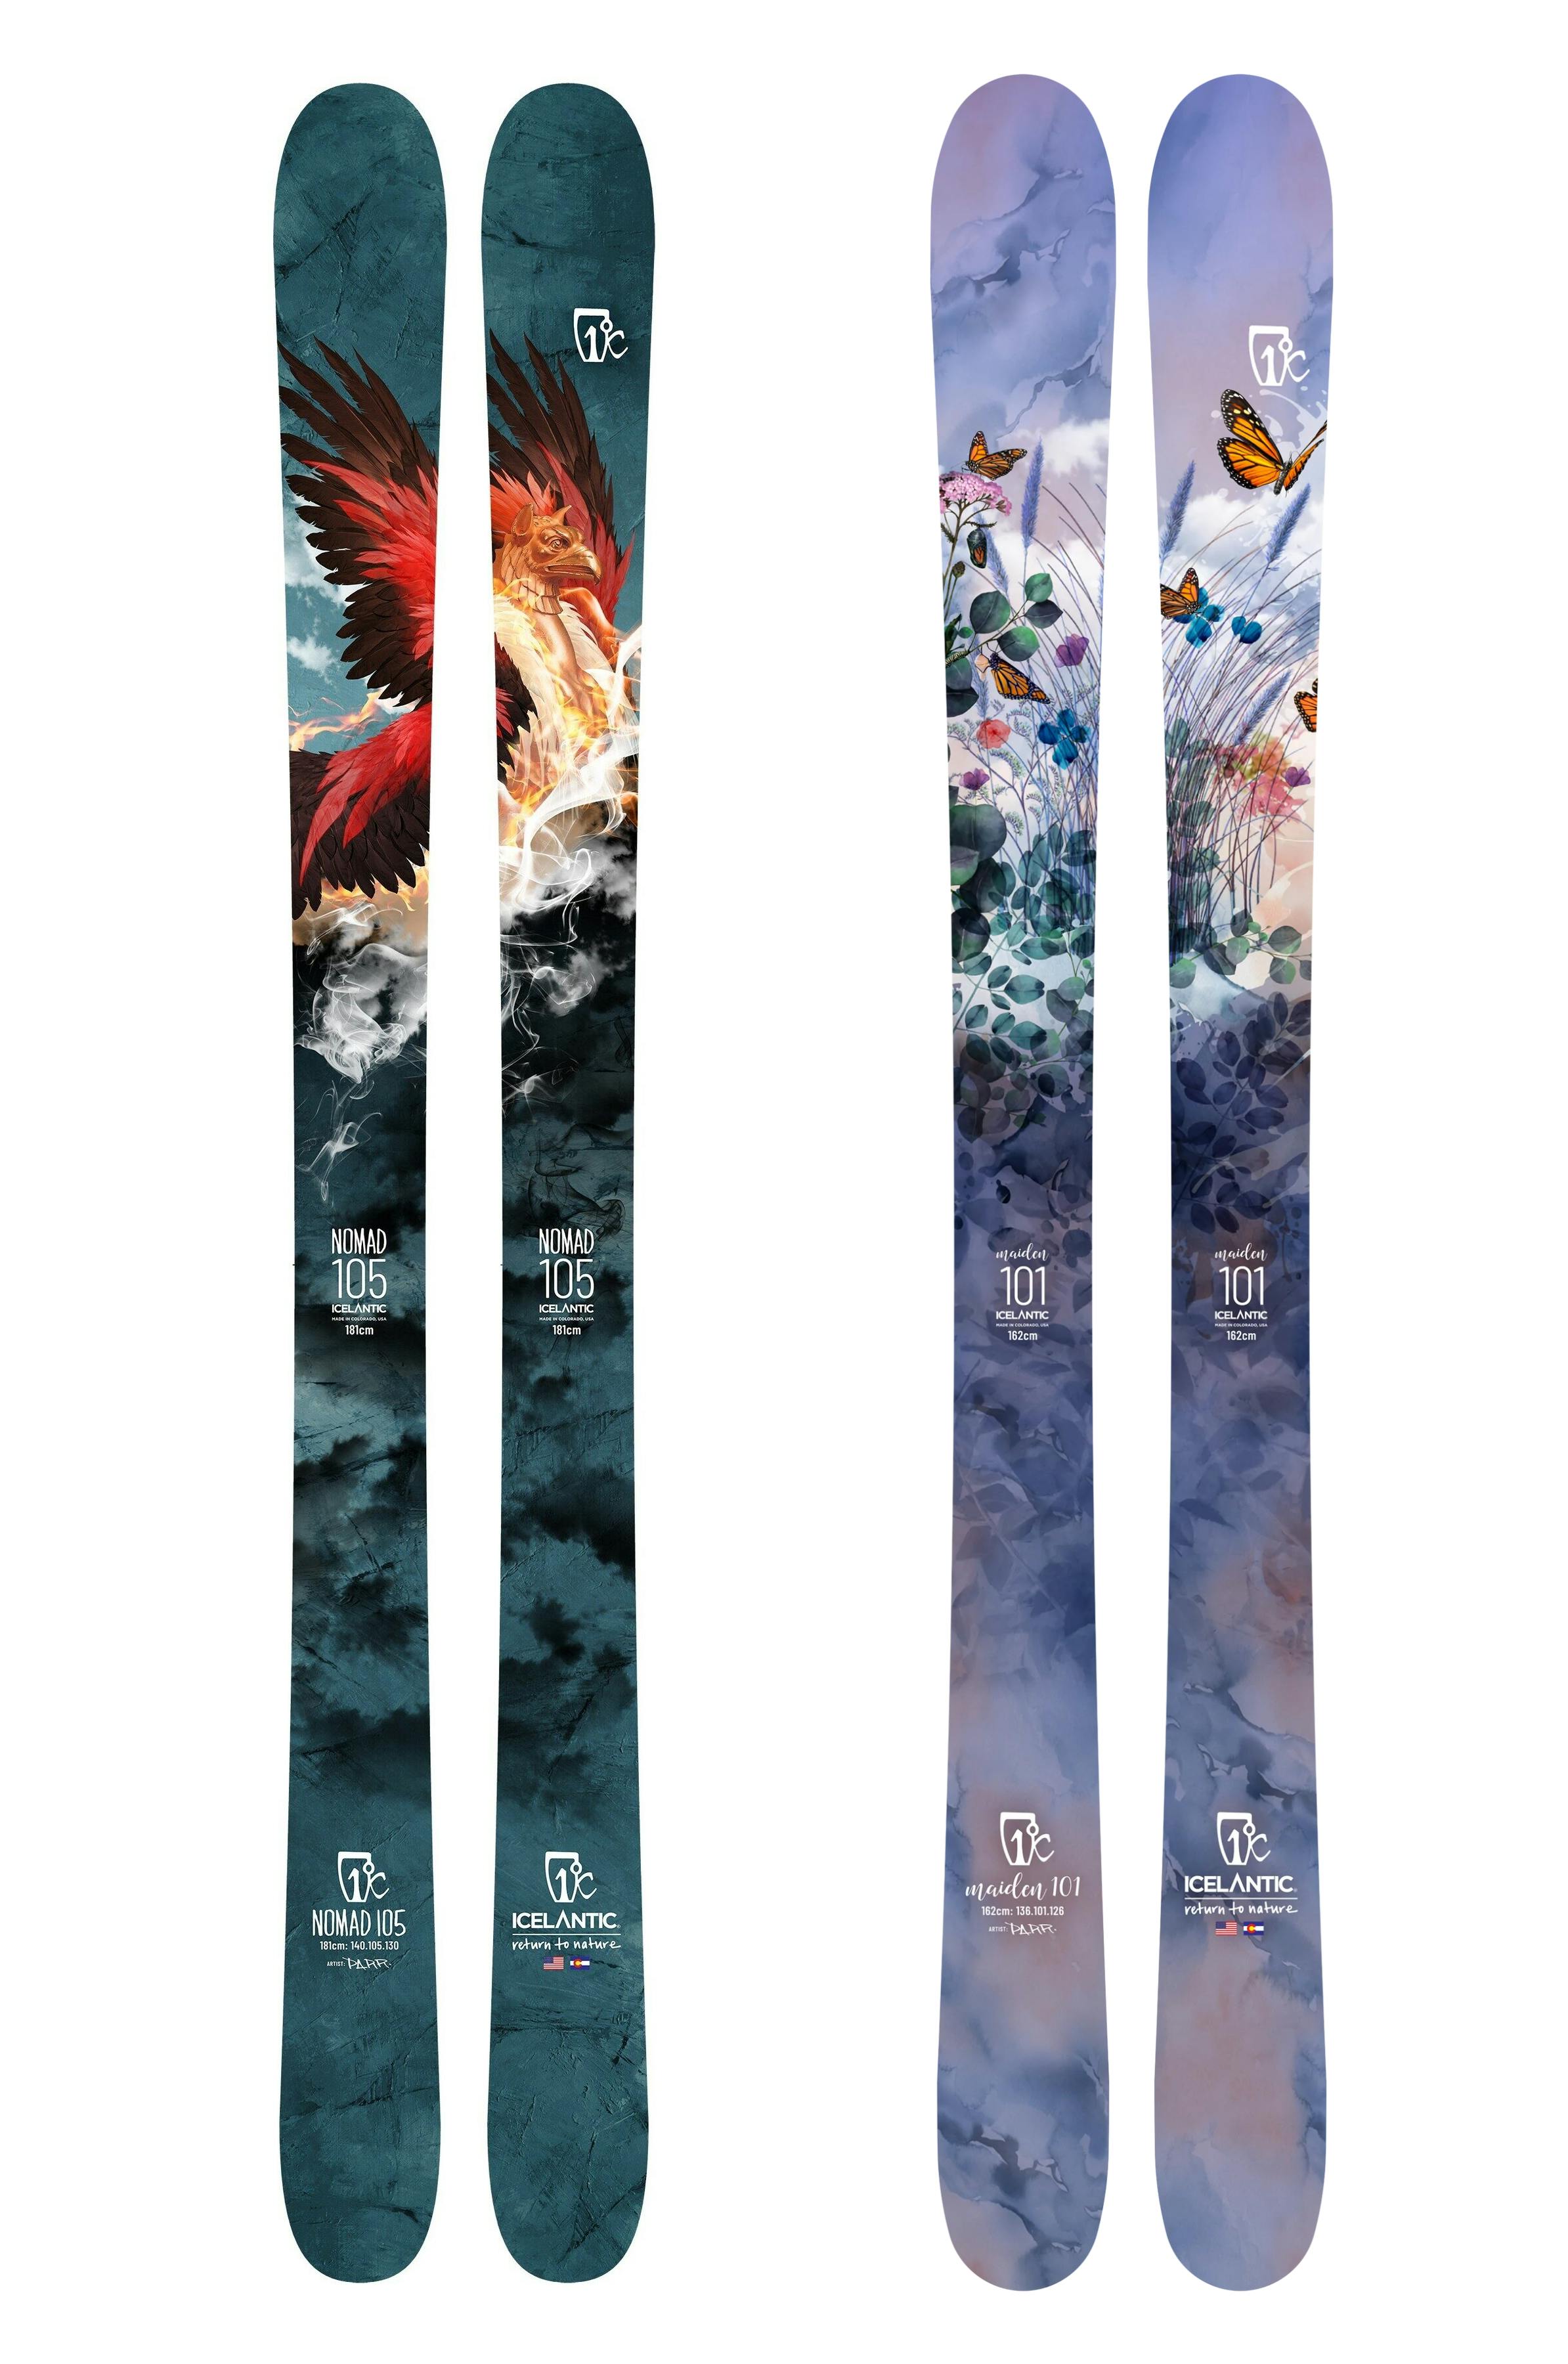 Product image of Nomad 105 and Maiden 101 skis